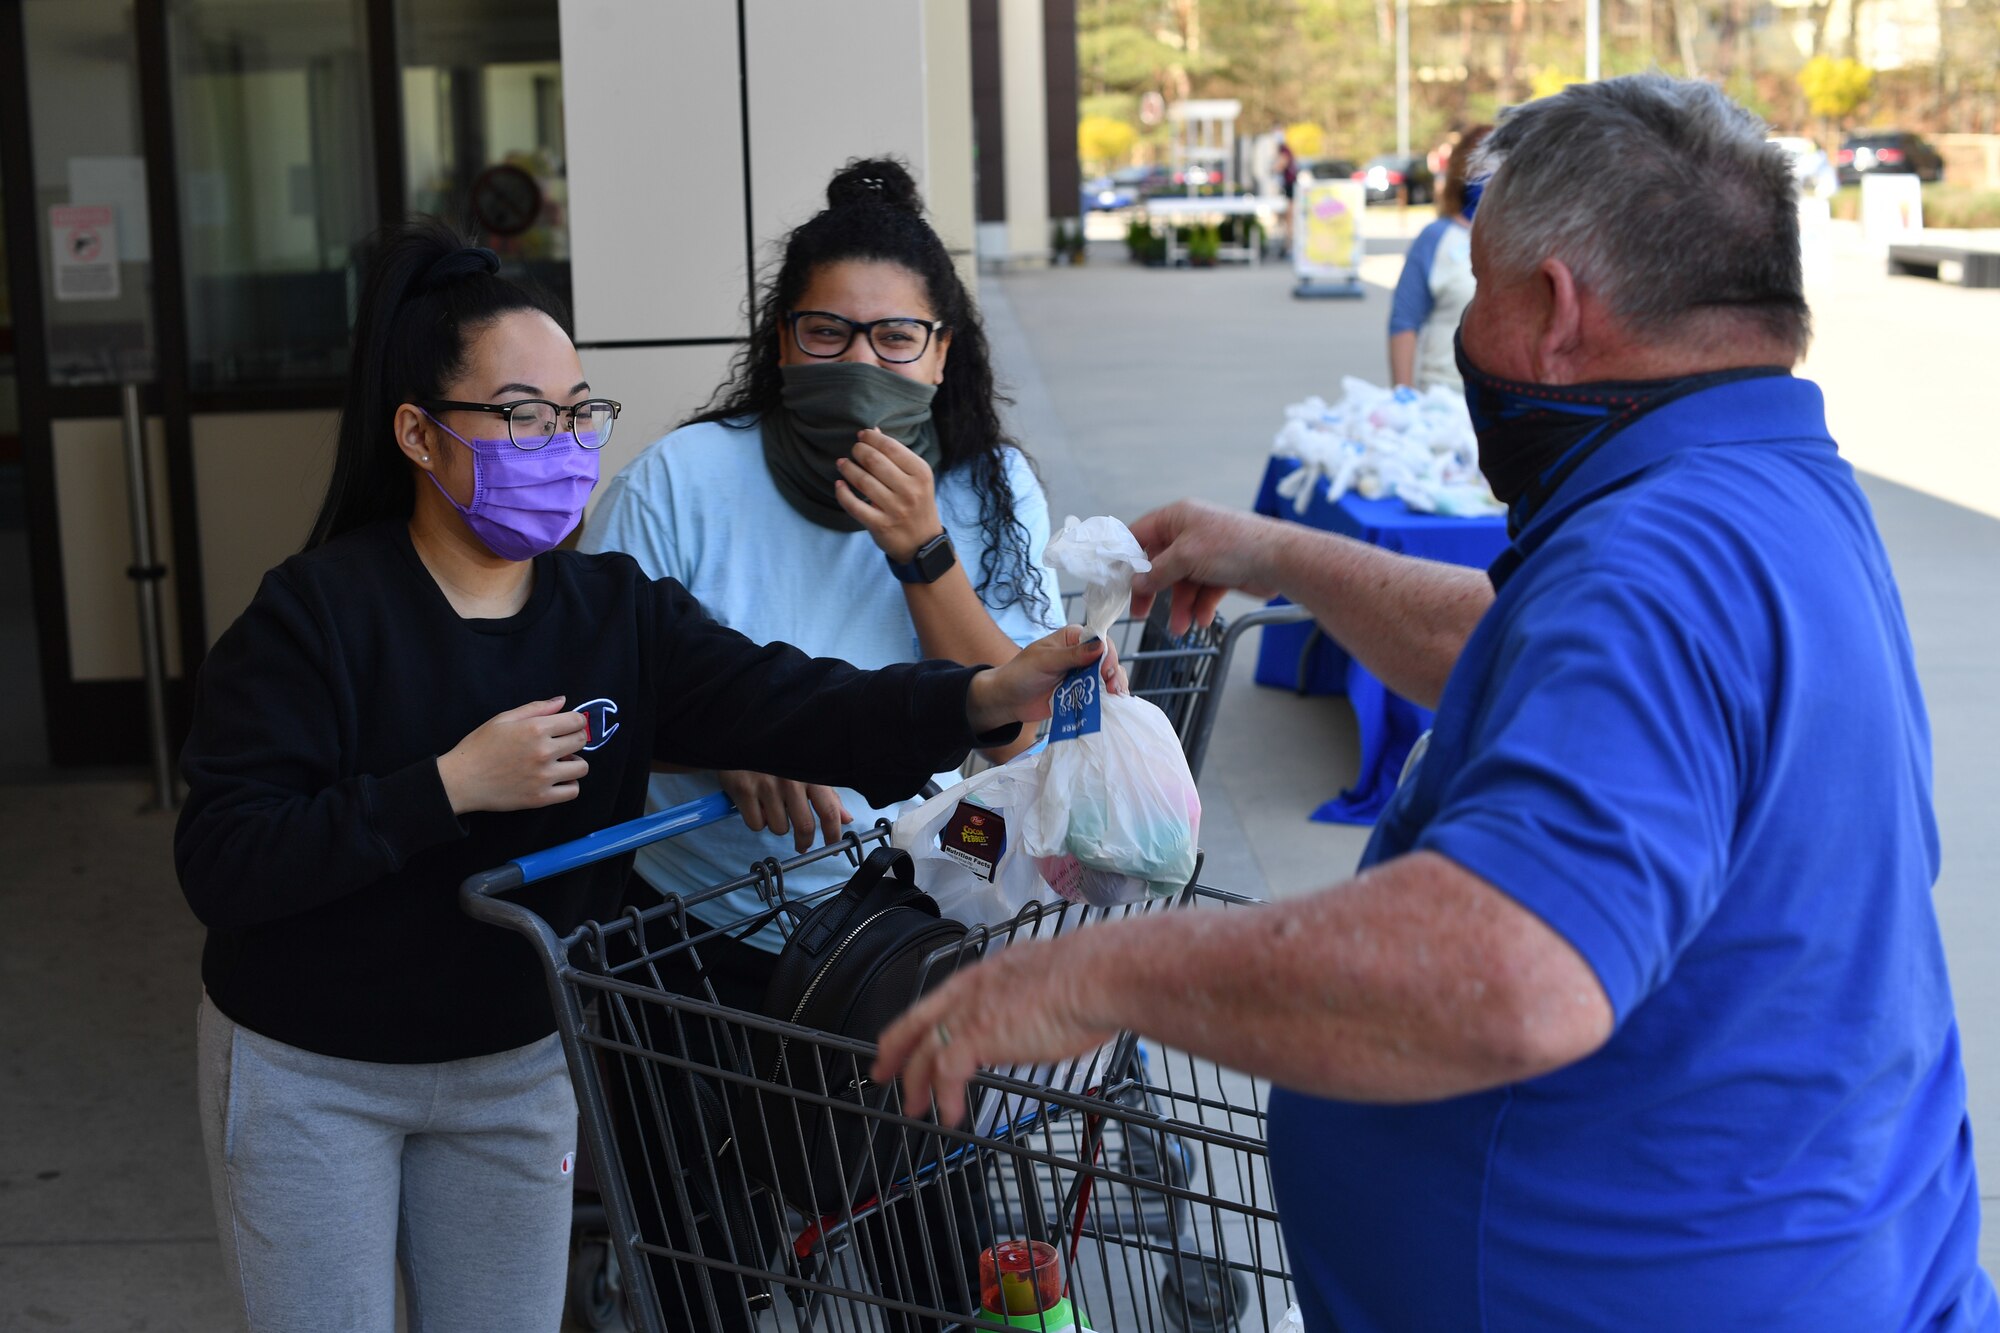 An individual hands an Easter bag to two shoppers leaving the commissary.